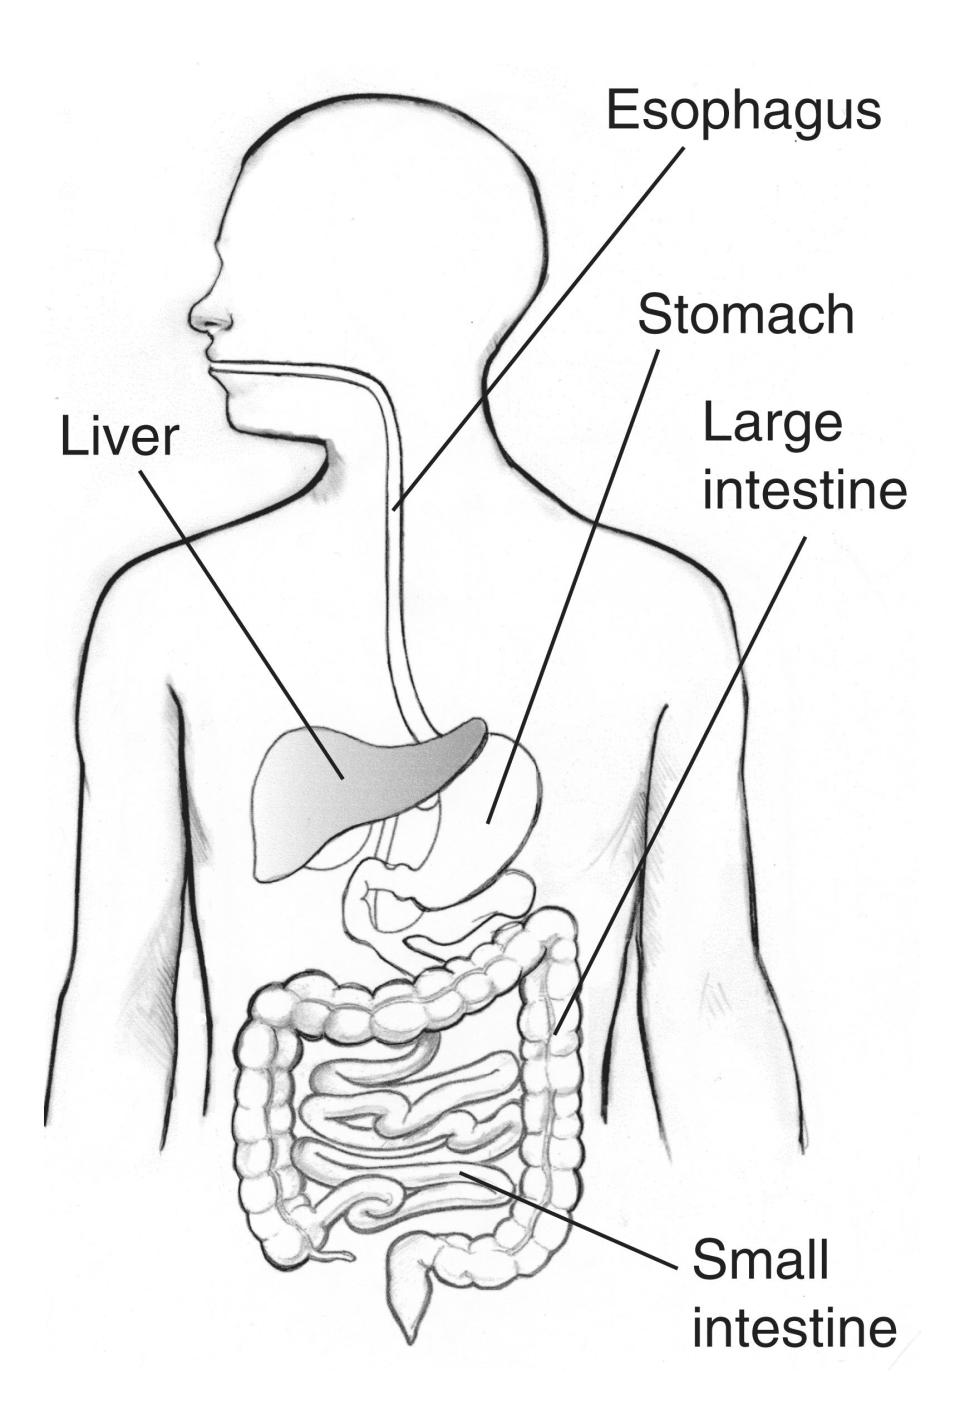 A drawing of the digestive tract, with the liver shaded. Hepatitis A is a liver disease.